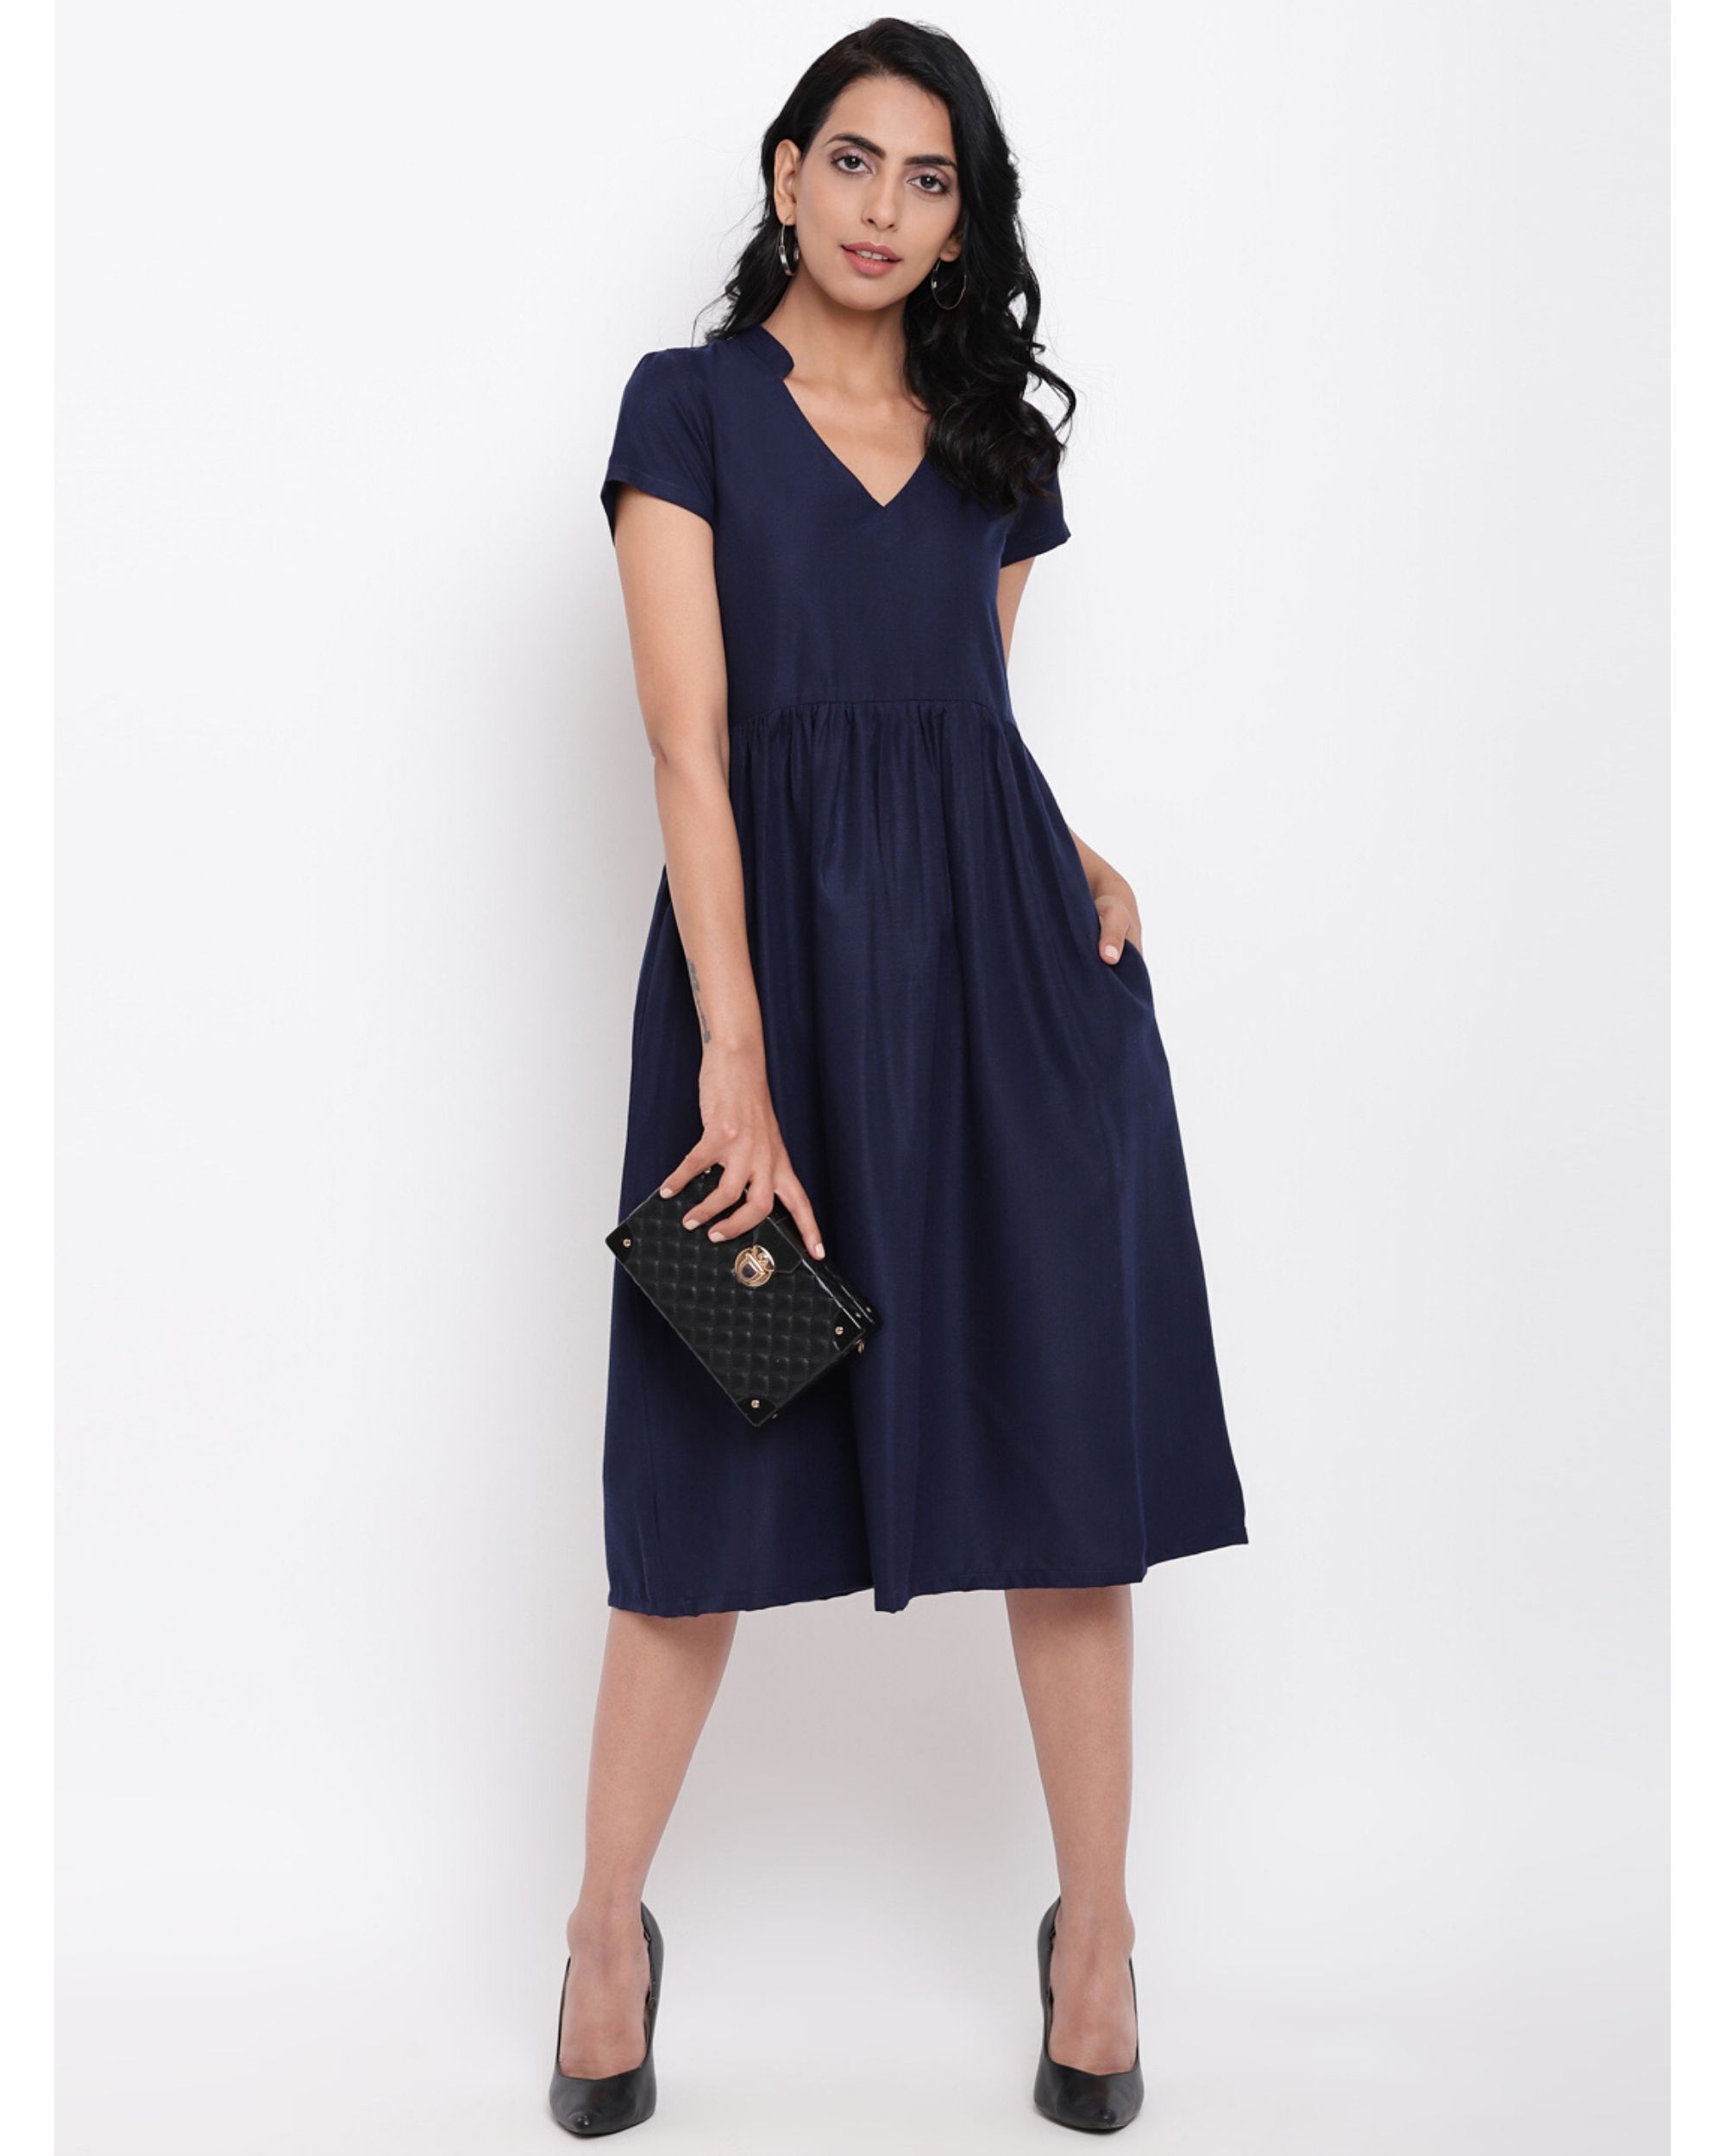 Navy blue gathered collar dress by trueBrowns | The Secret Label